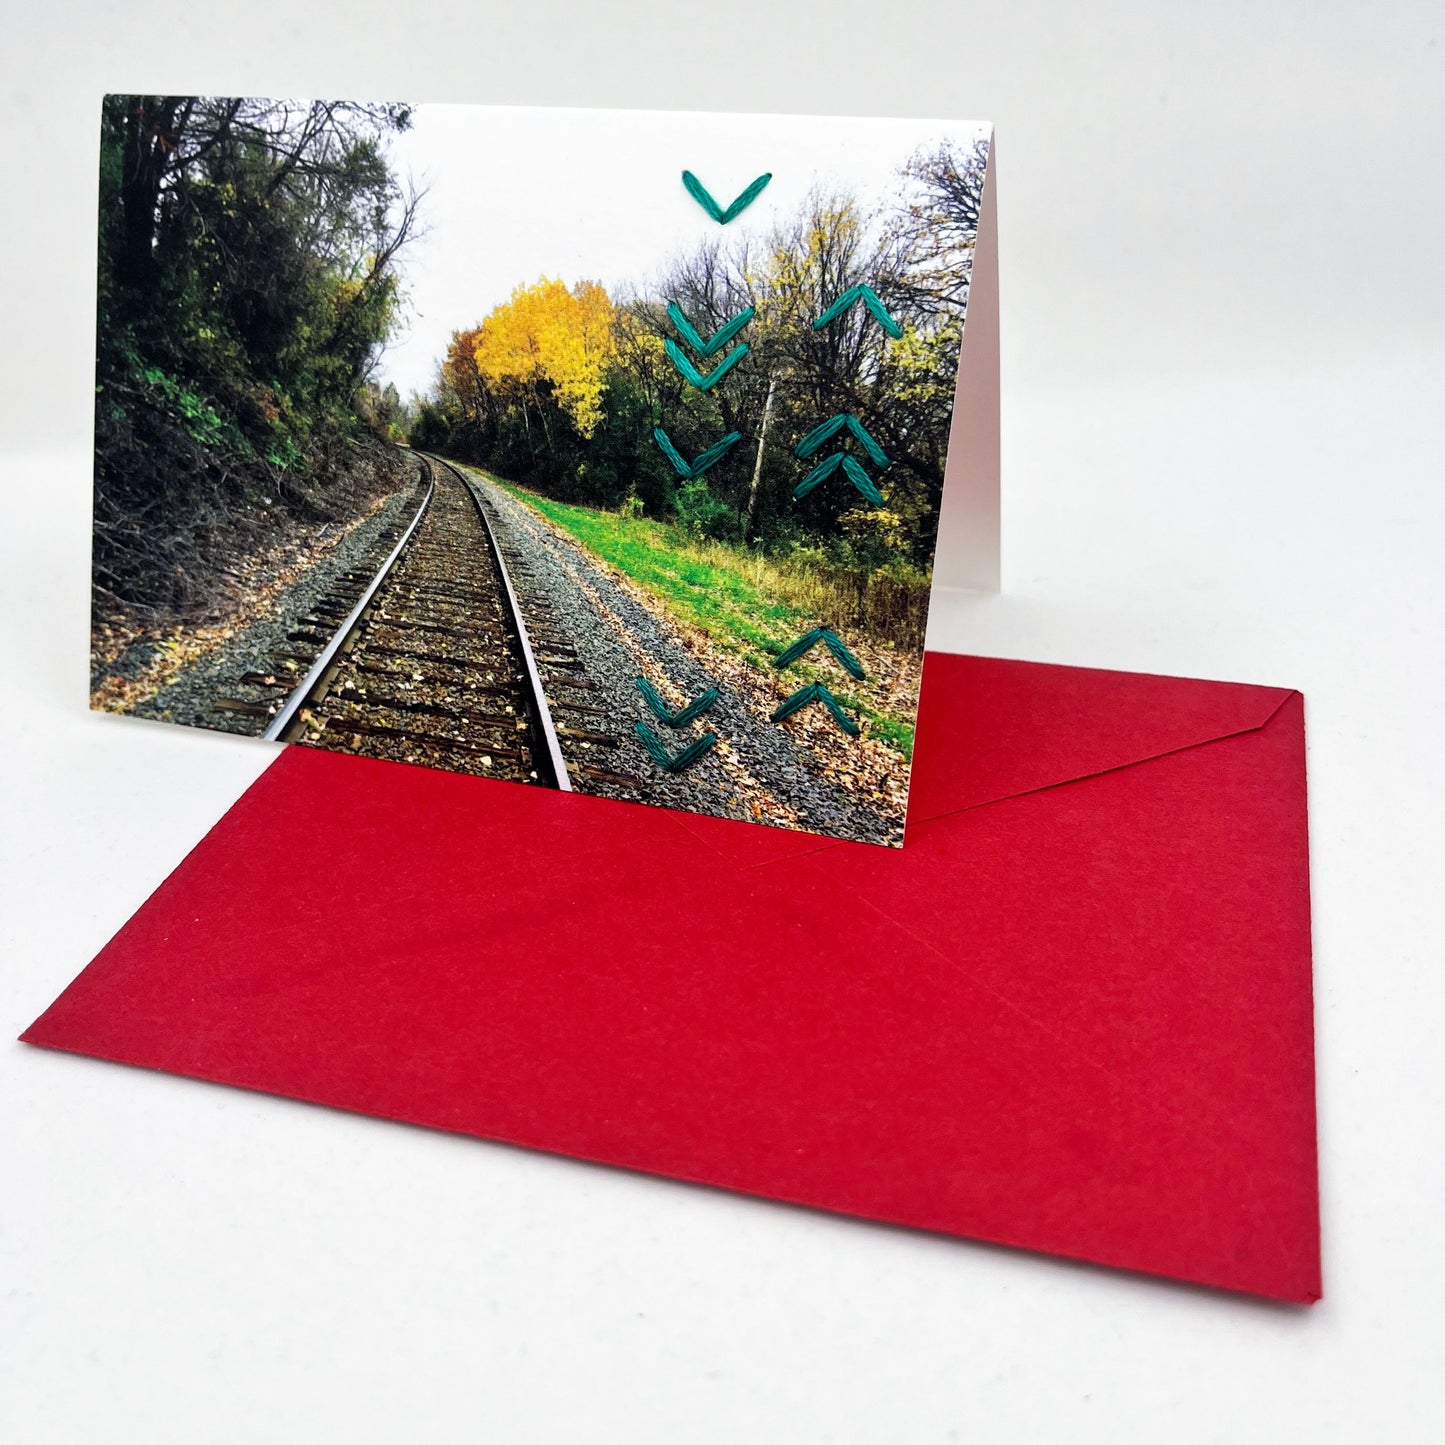 Greeting card standing upright on an envelope. Photo of train tracks in fall. Rows of teal chevron stitches along right side card